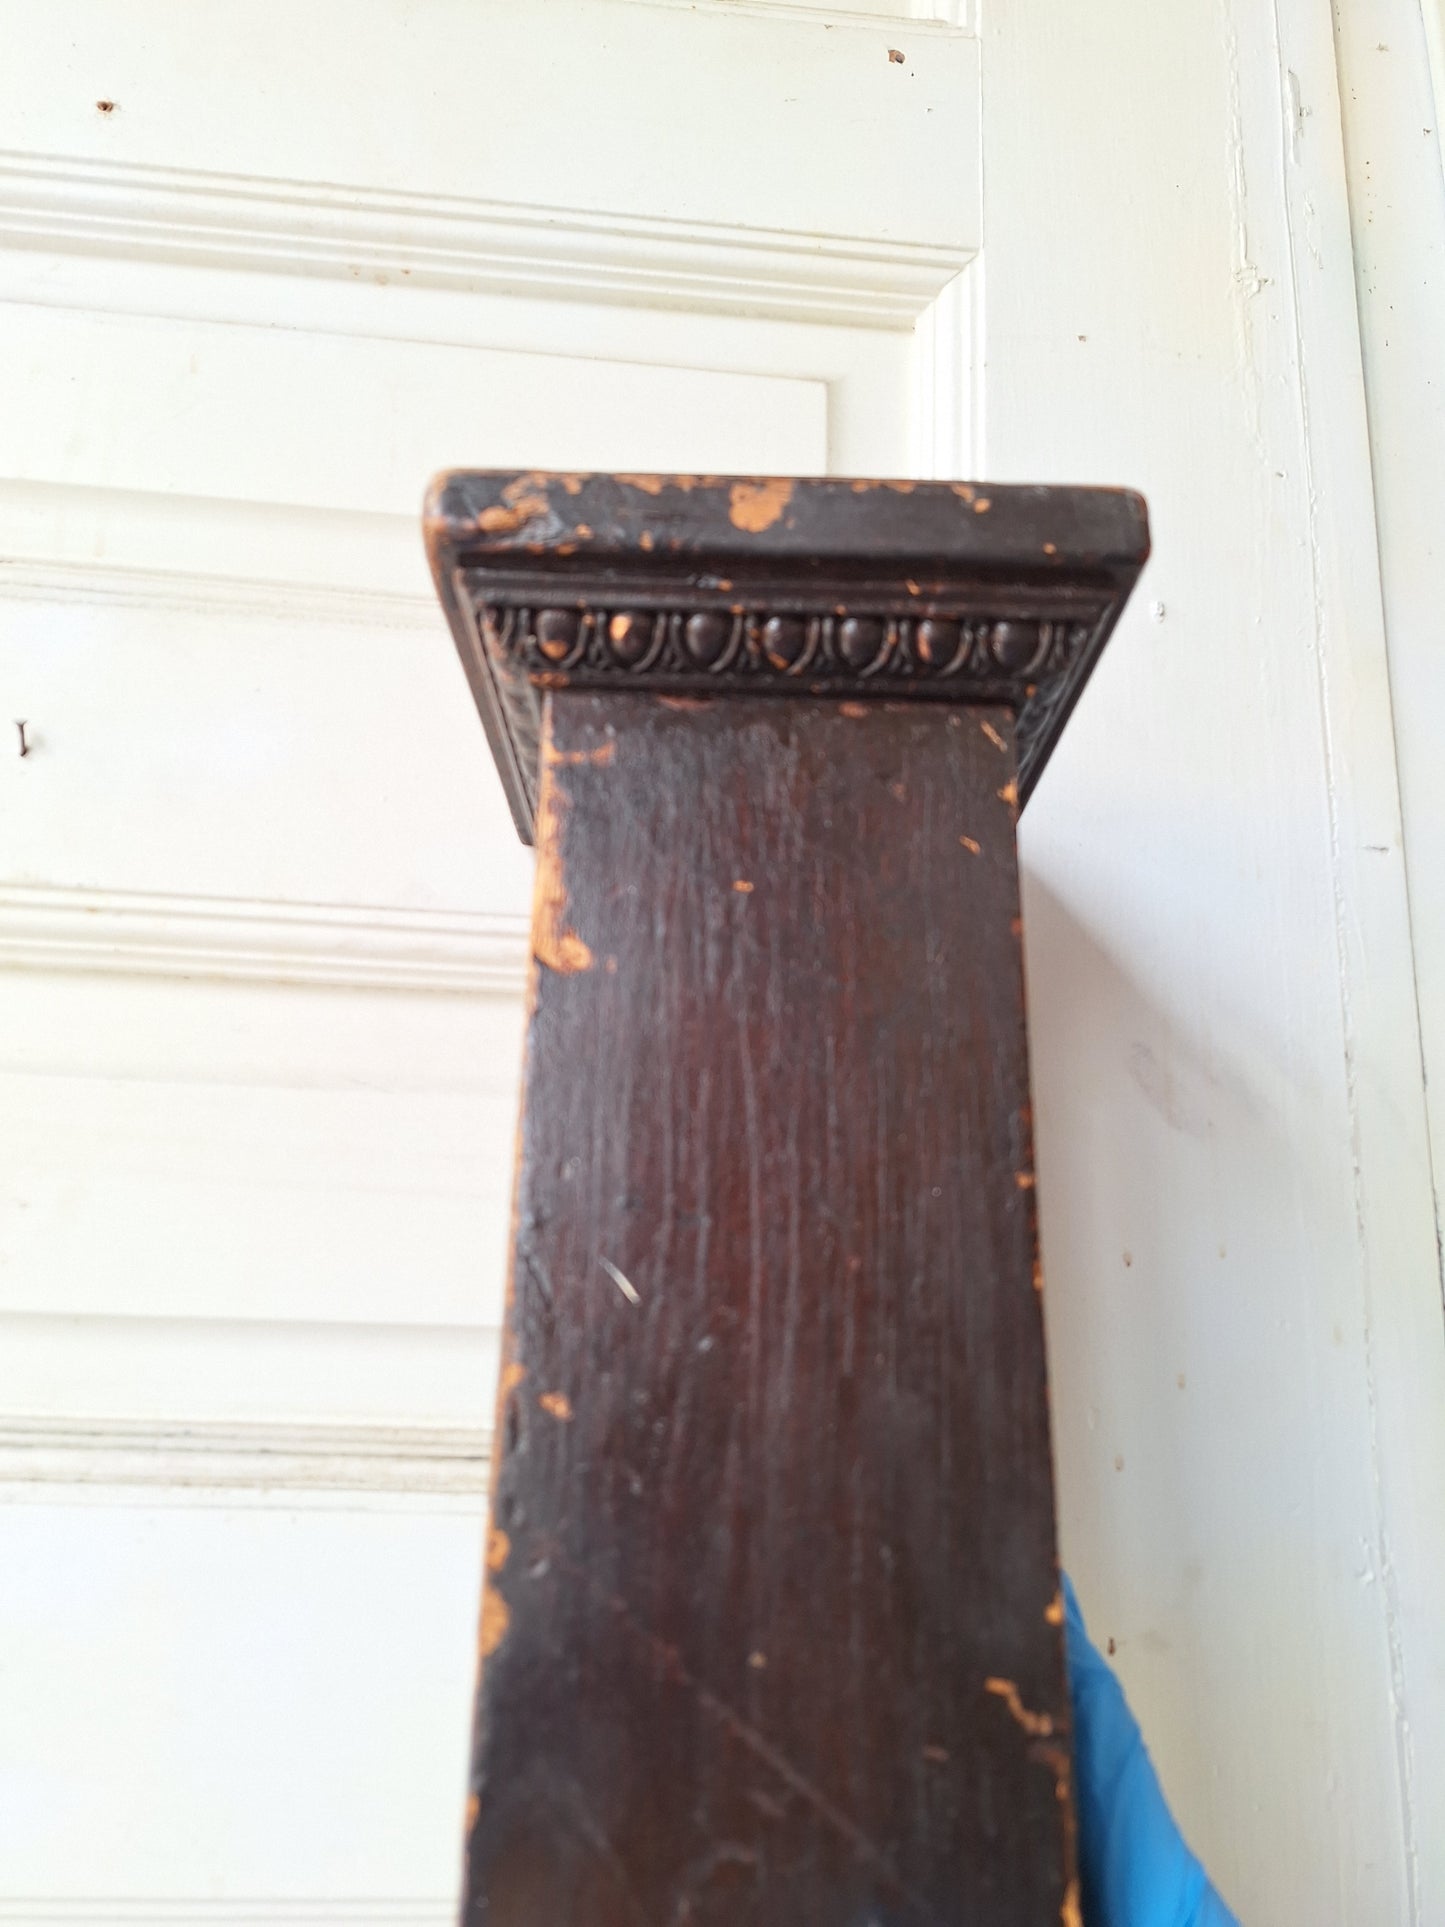 Small Antique Newel Post, Staircase Post, Staircase Newel, Stair Case Post 041605